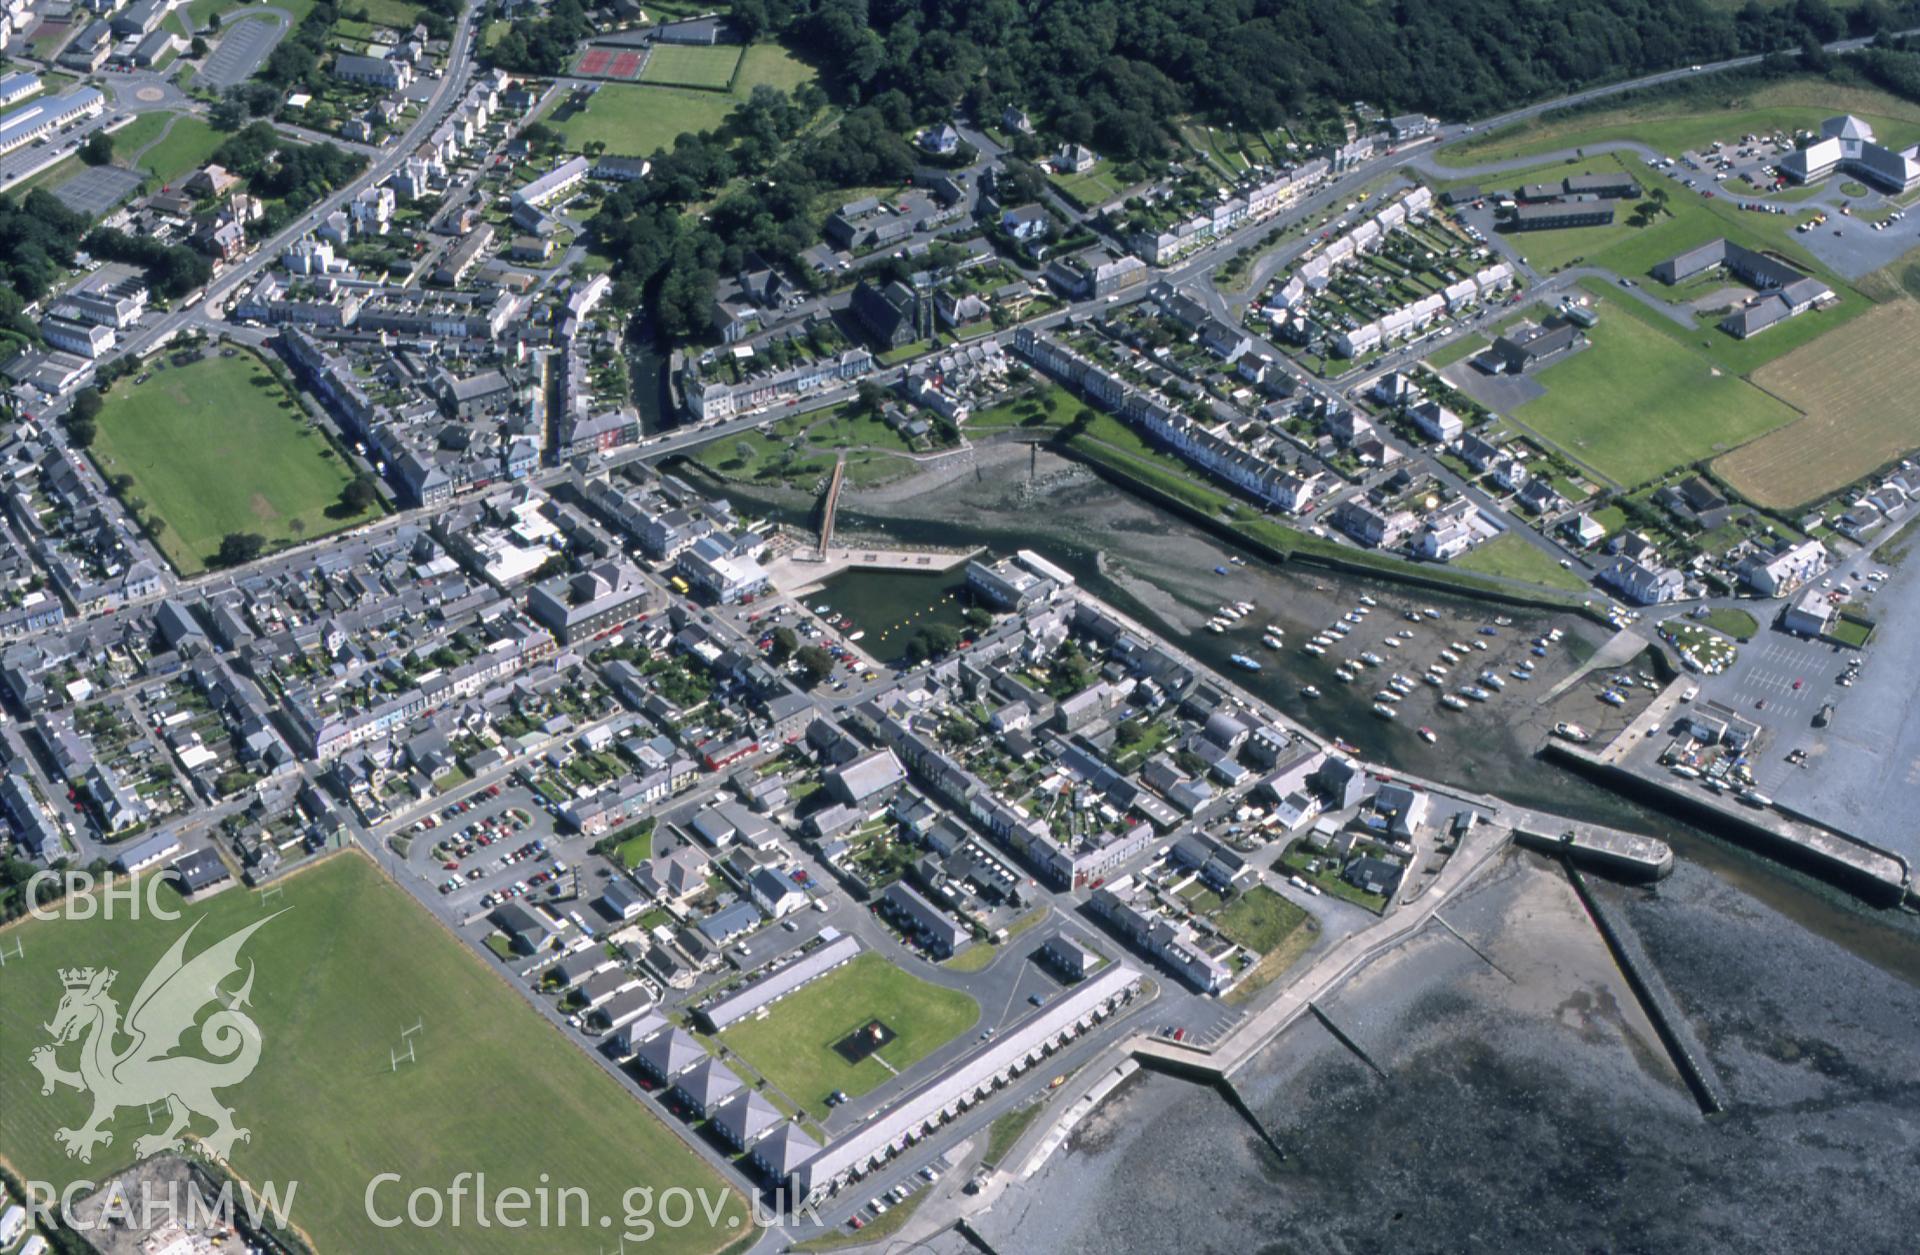 RCAHMW colour slide oblique aerial photograph of Aberaeron, taken by T.G.Driver on the 17/07/2000